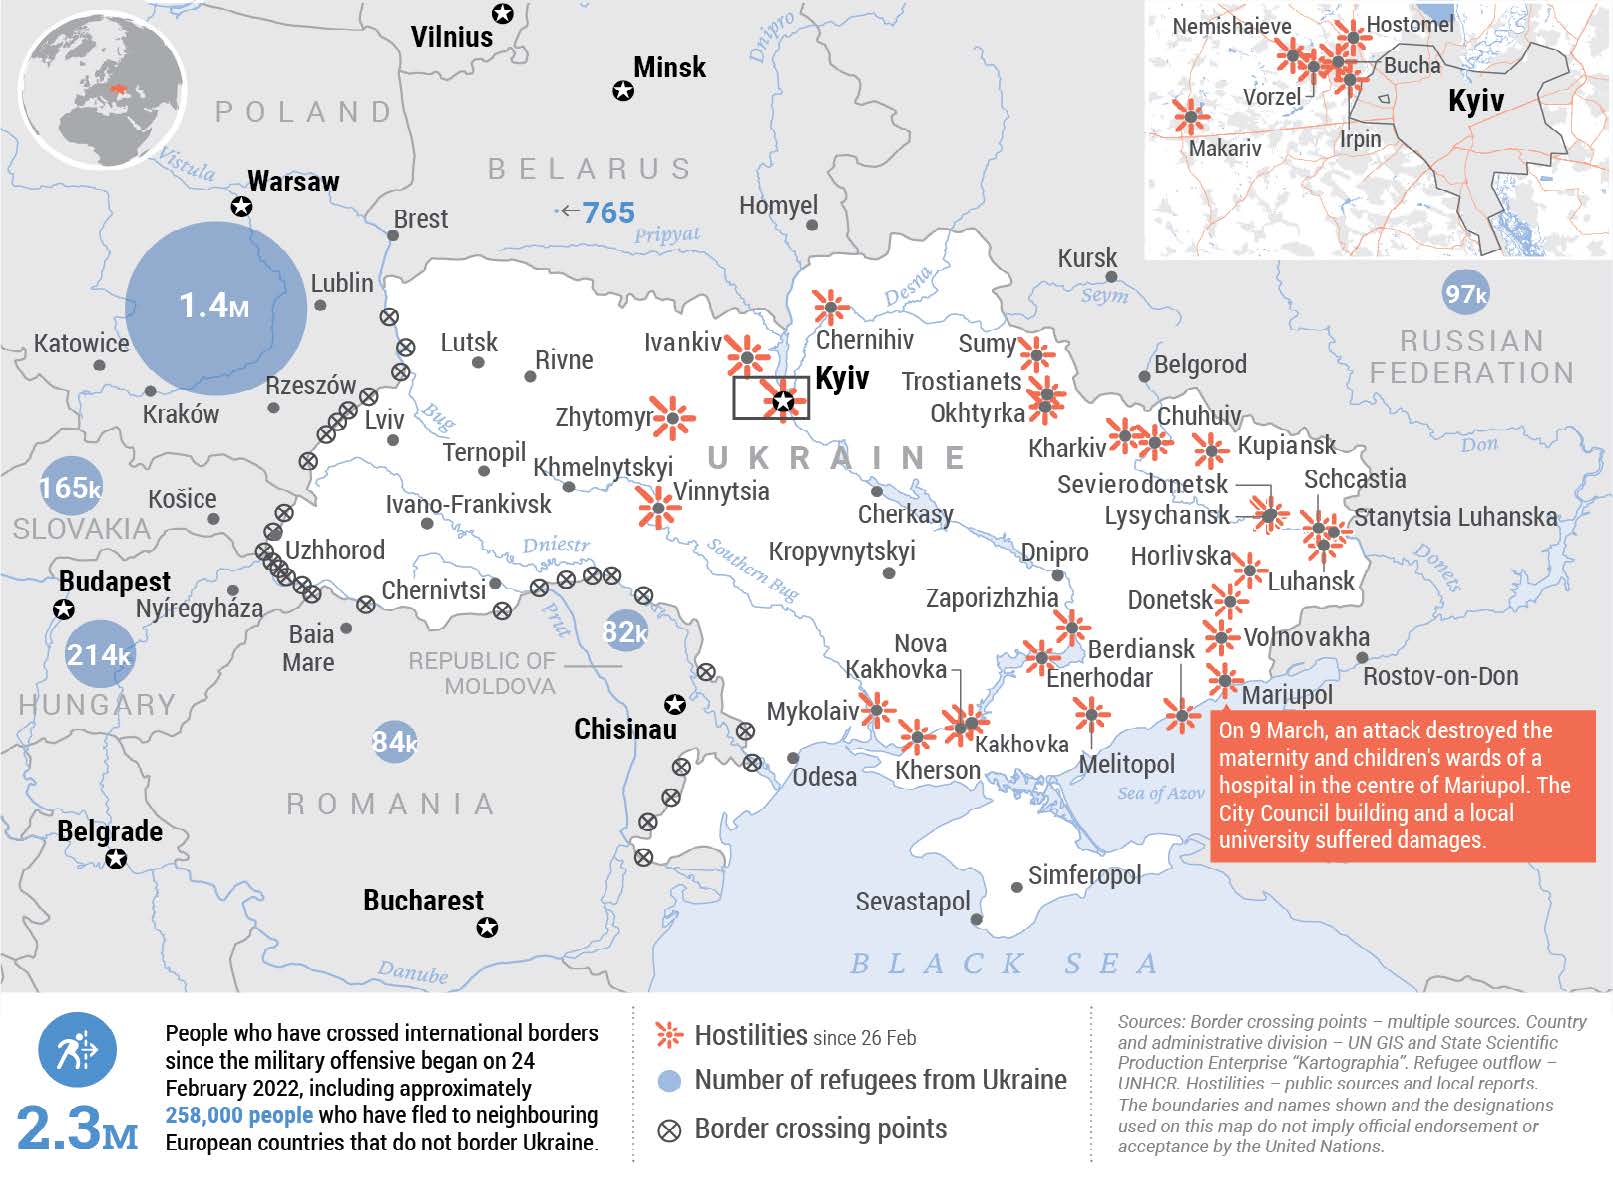 Ukraine: Humanitarian Impact Situation Report As of 3:00 p.m. (EET), 10 March 2022